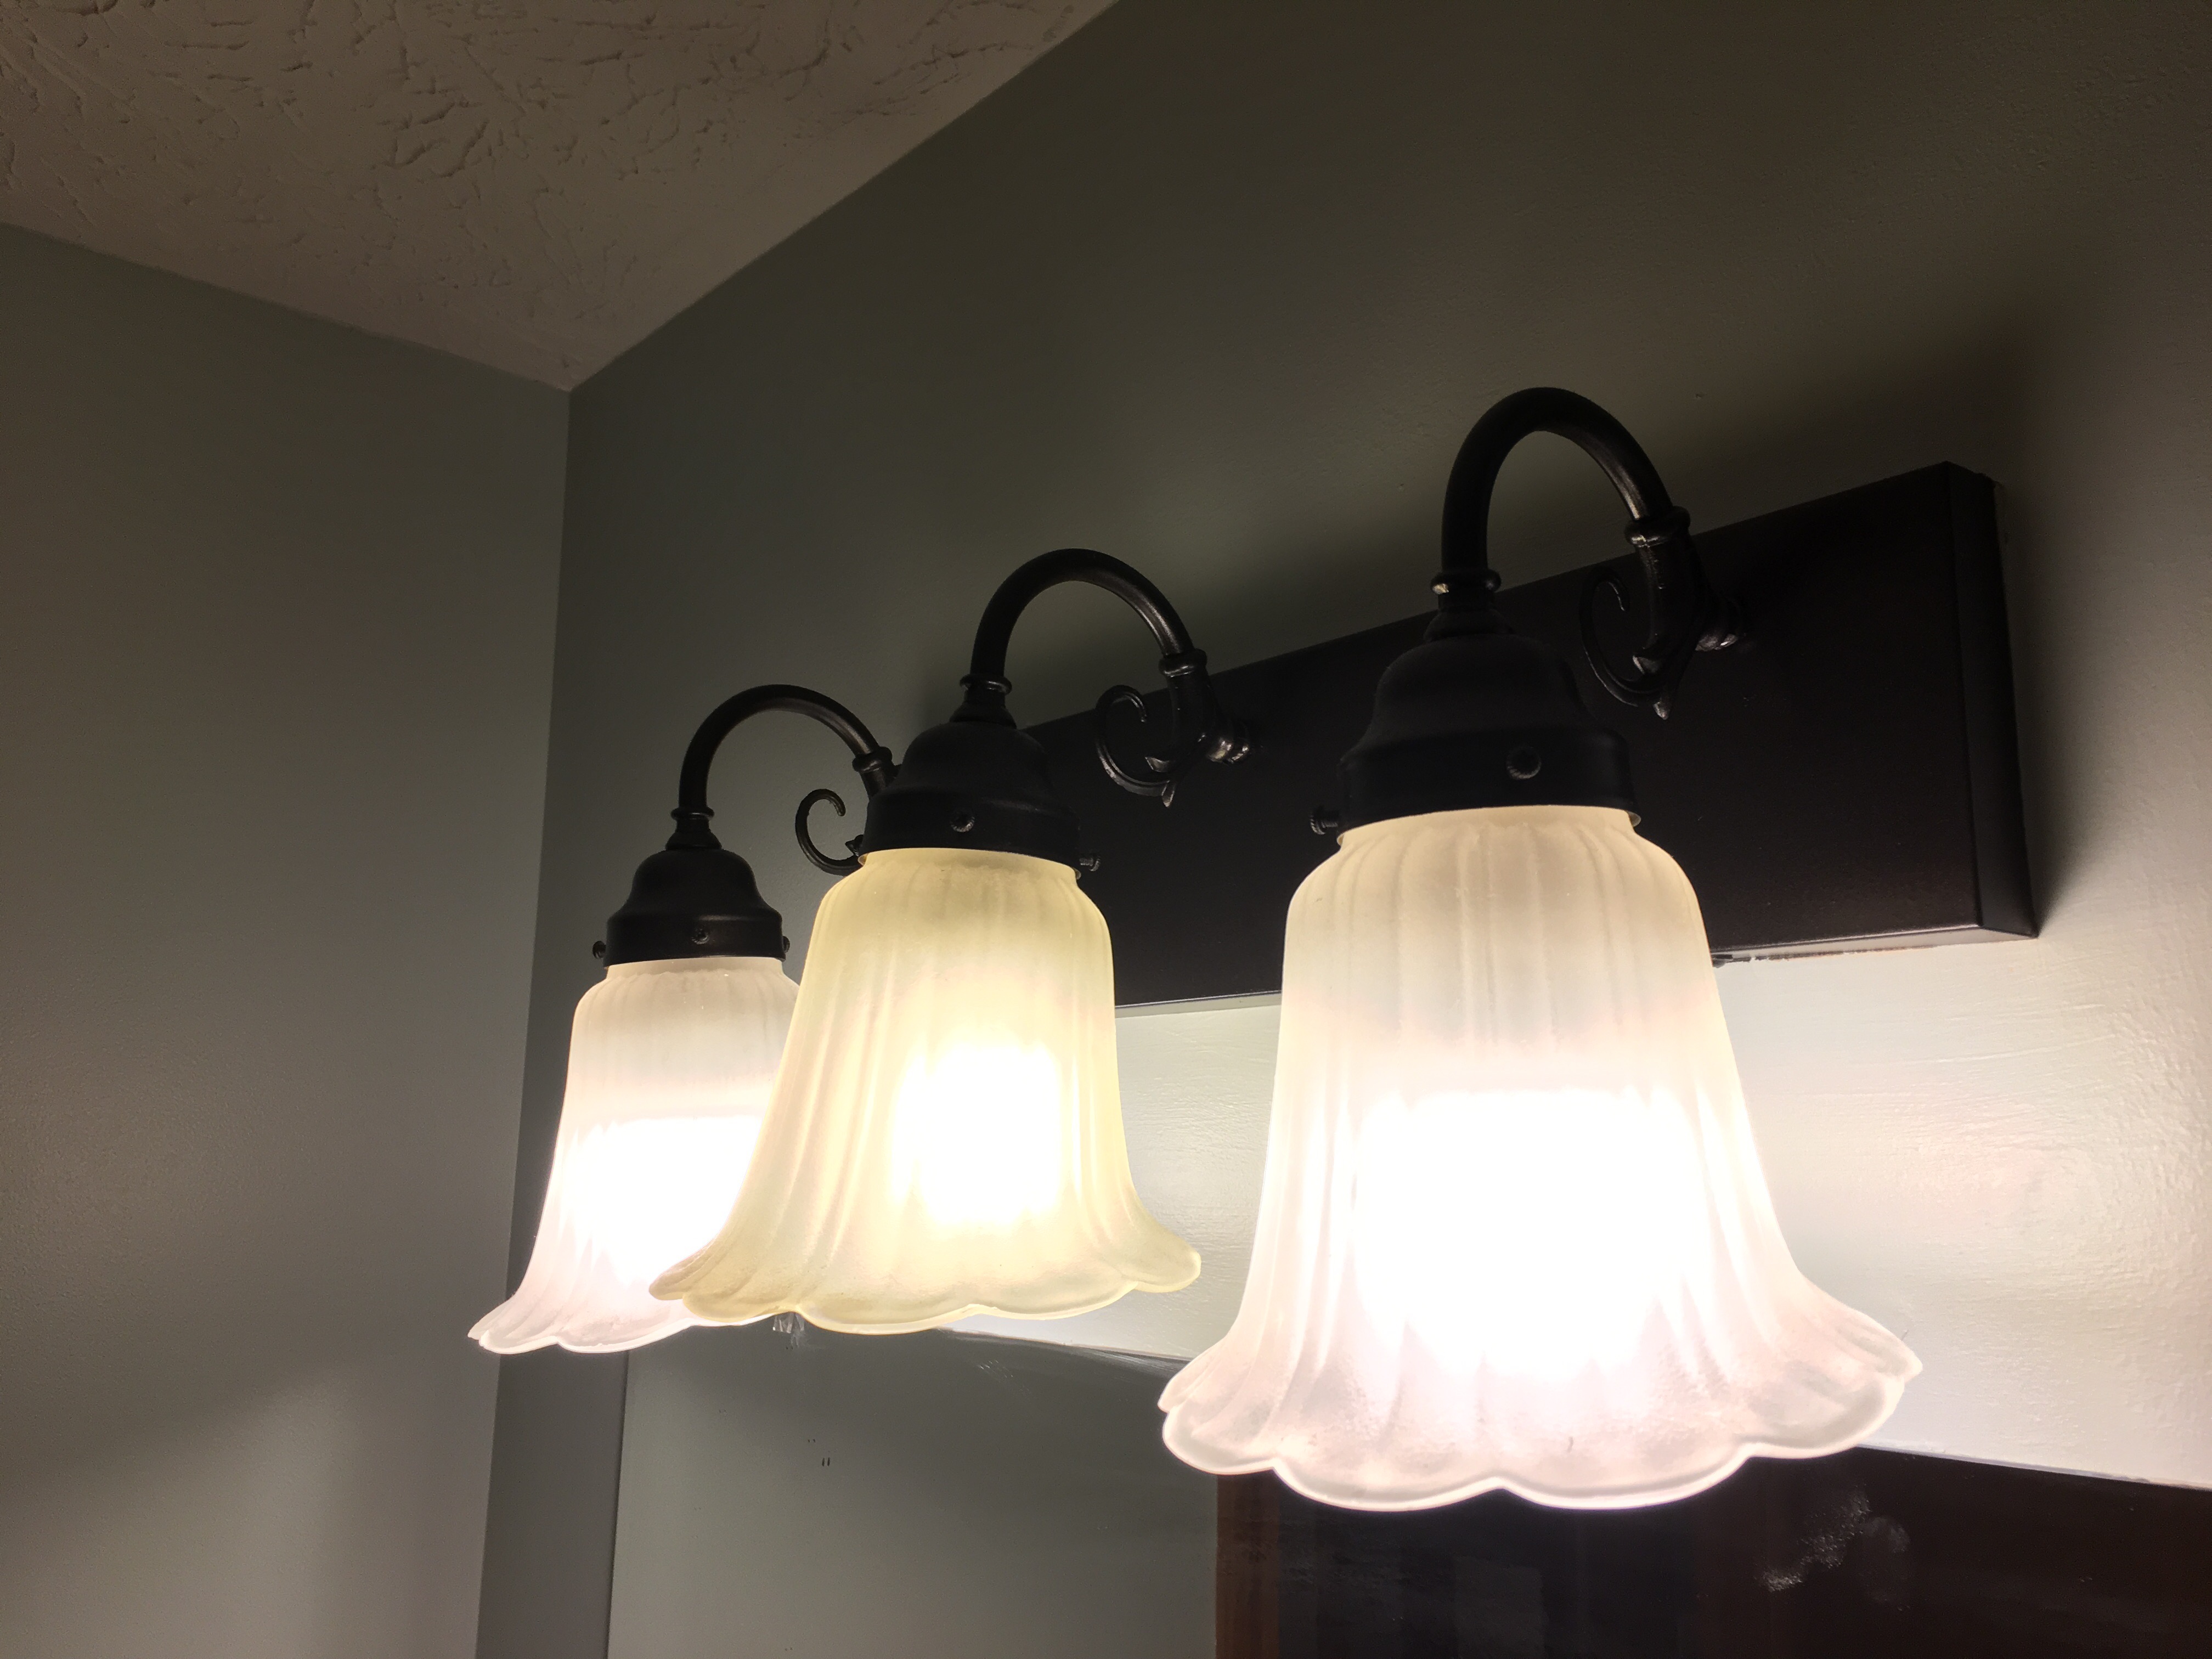 Spray Paint Light Fixture Upgrade Crochet It Creations,Shabby Chic French Country Bedroom